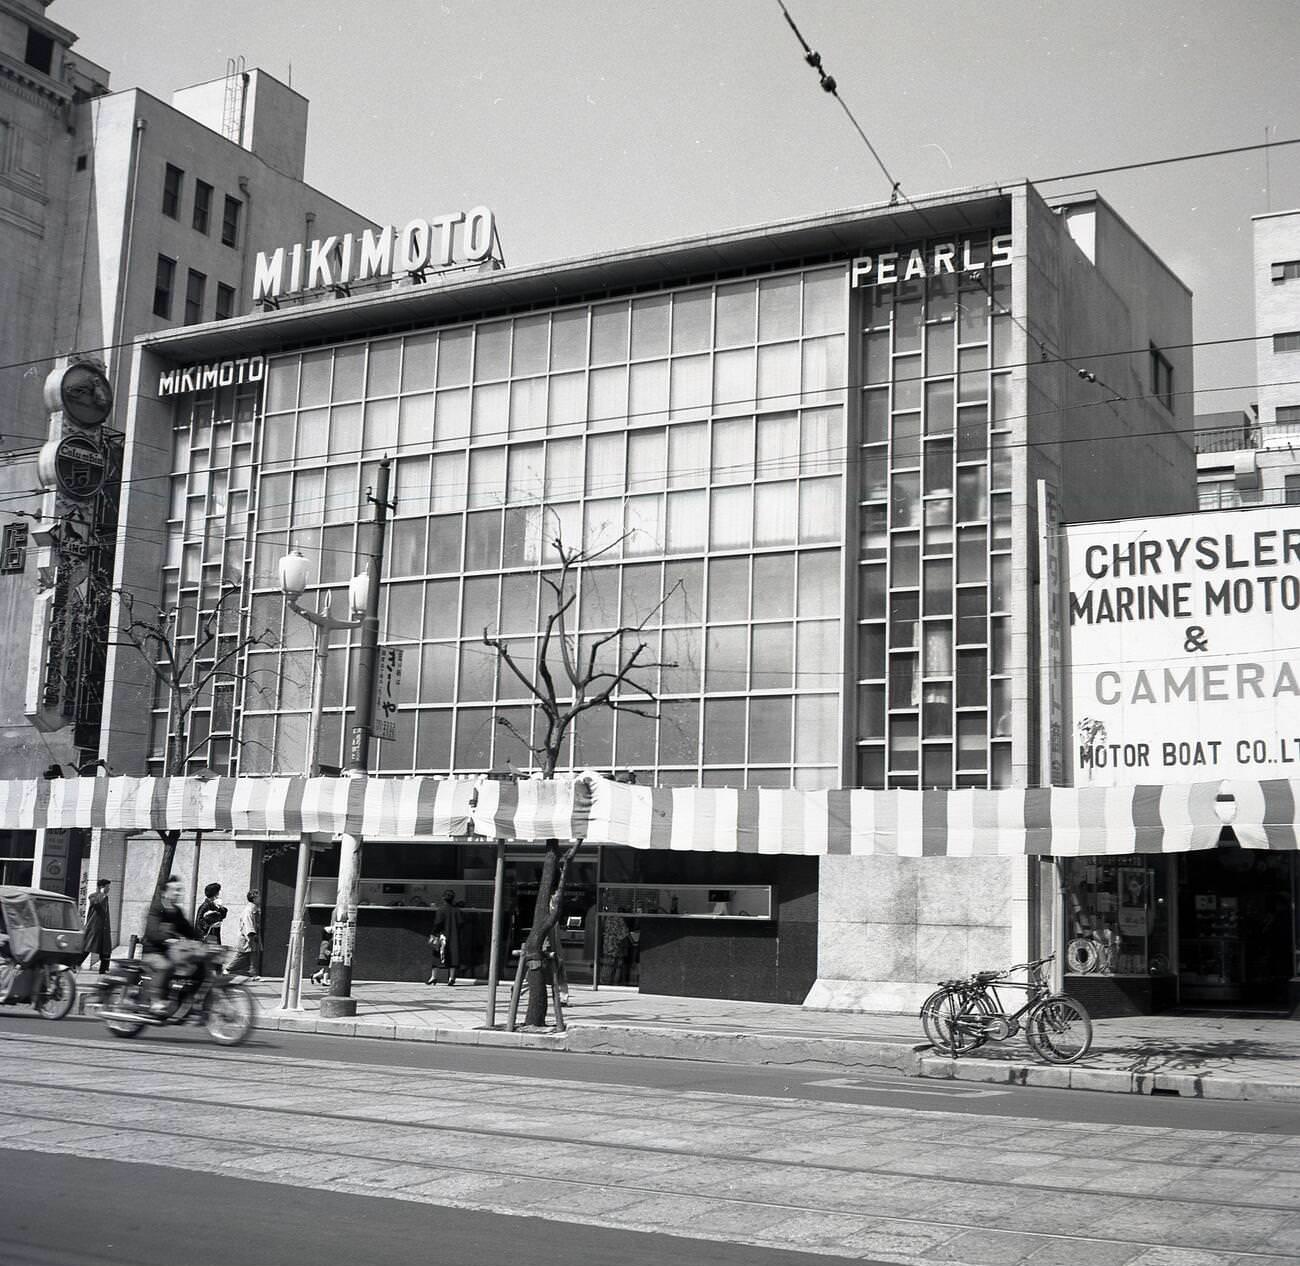 The exterior of the Japanese luxury pearl company, Mikimoto, 1950s.